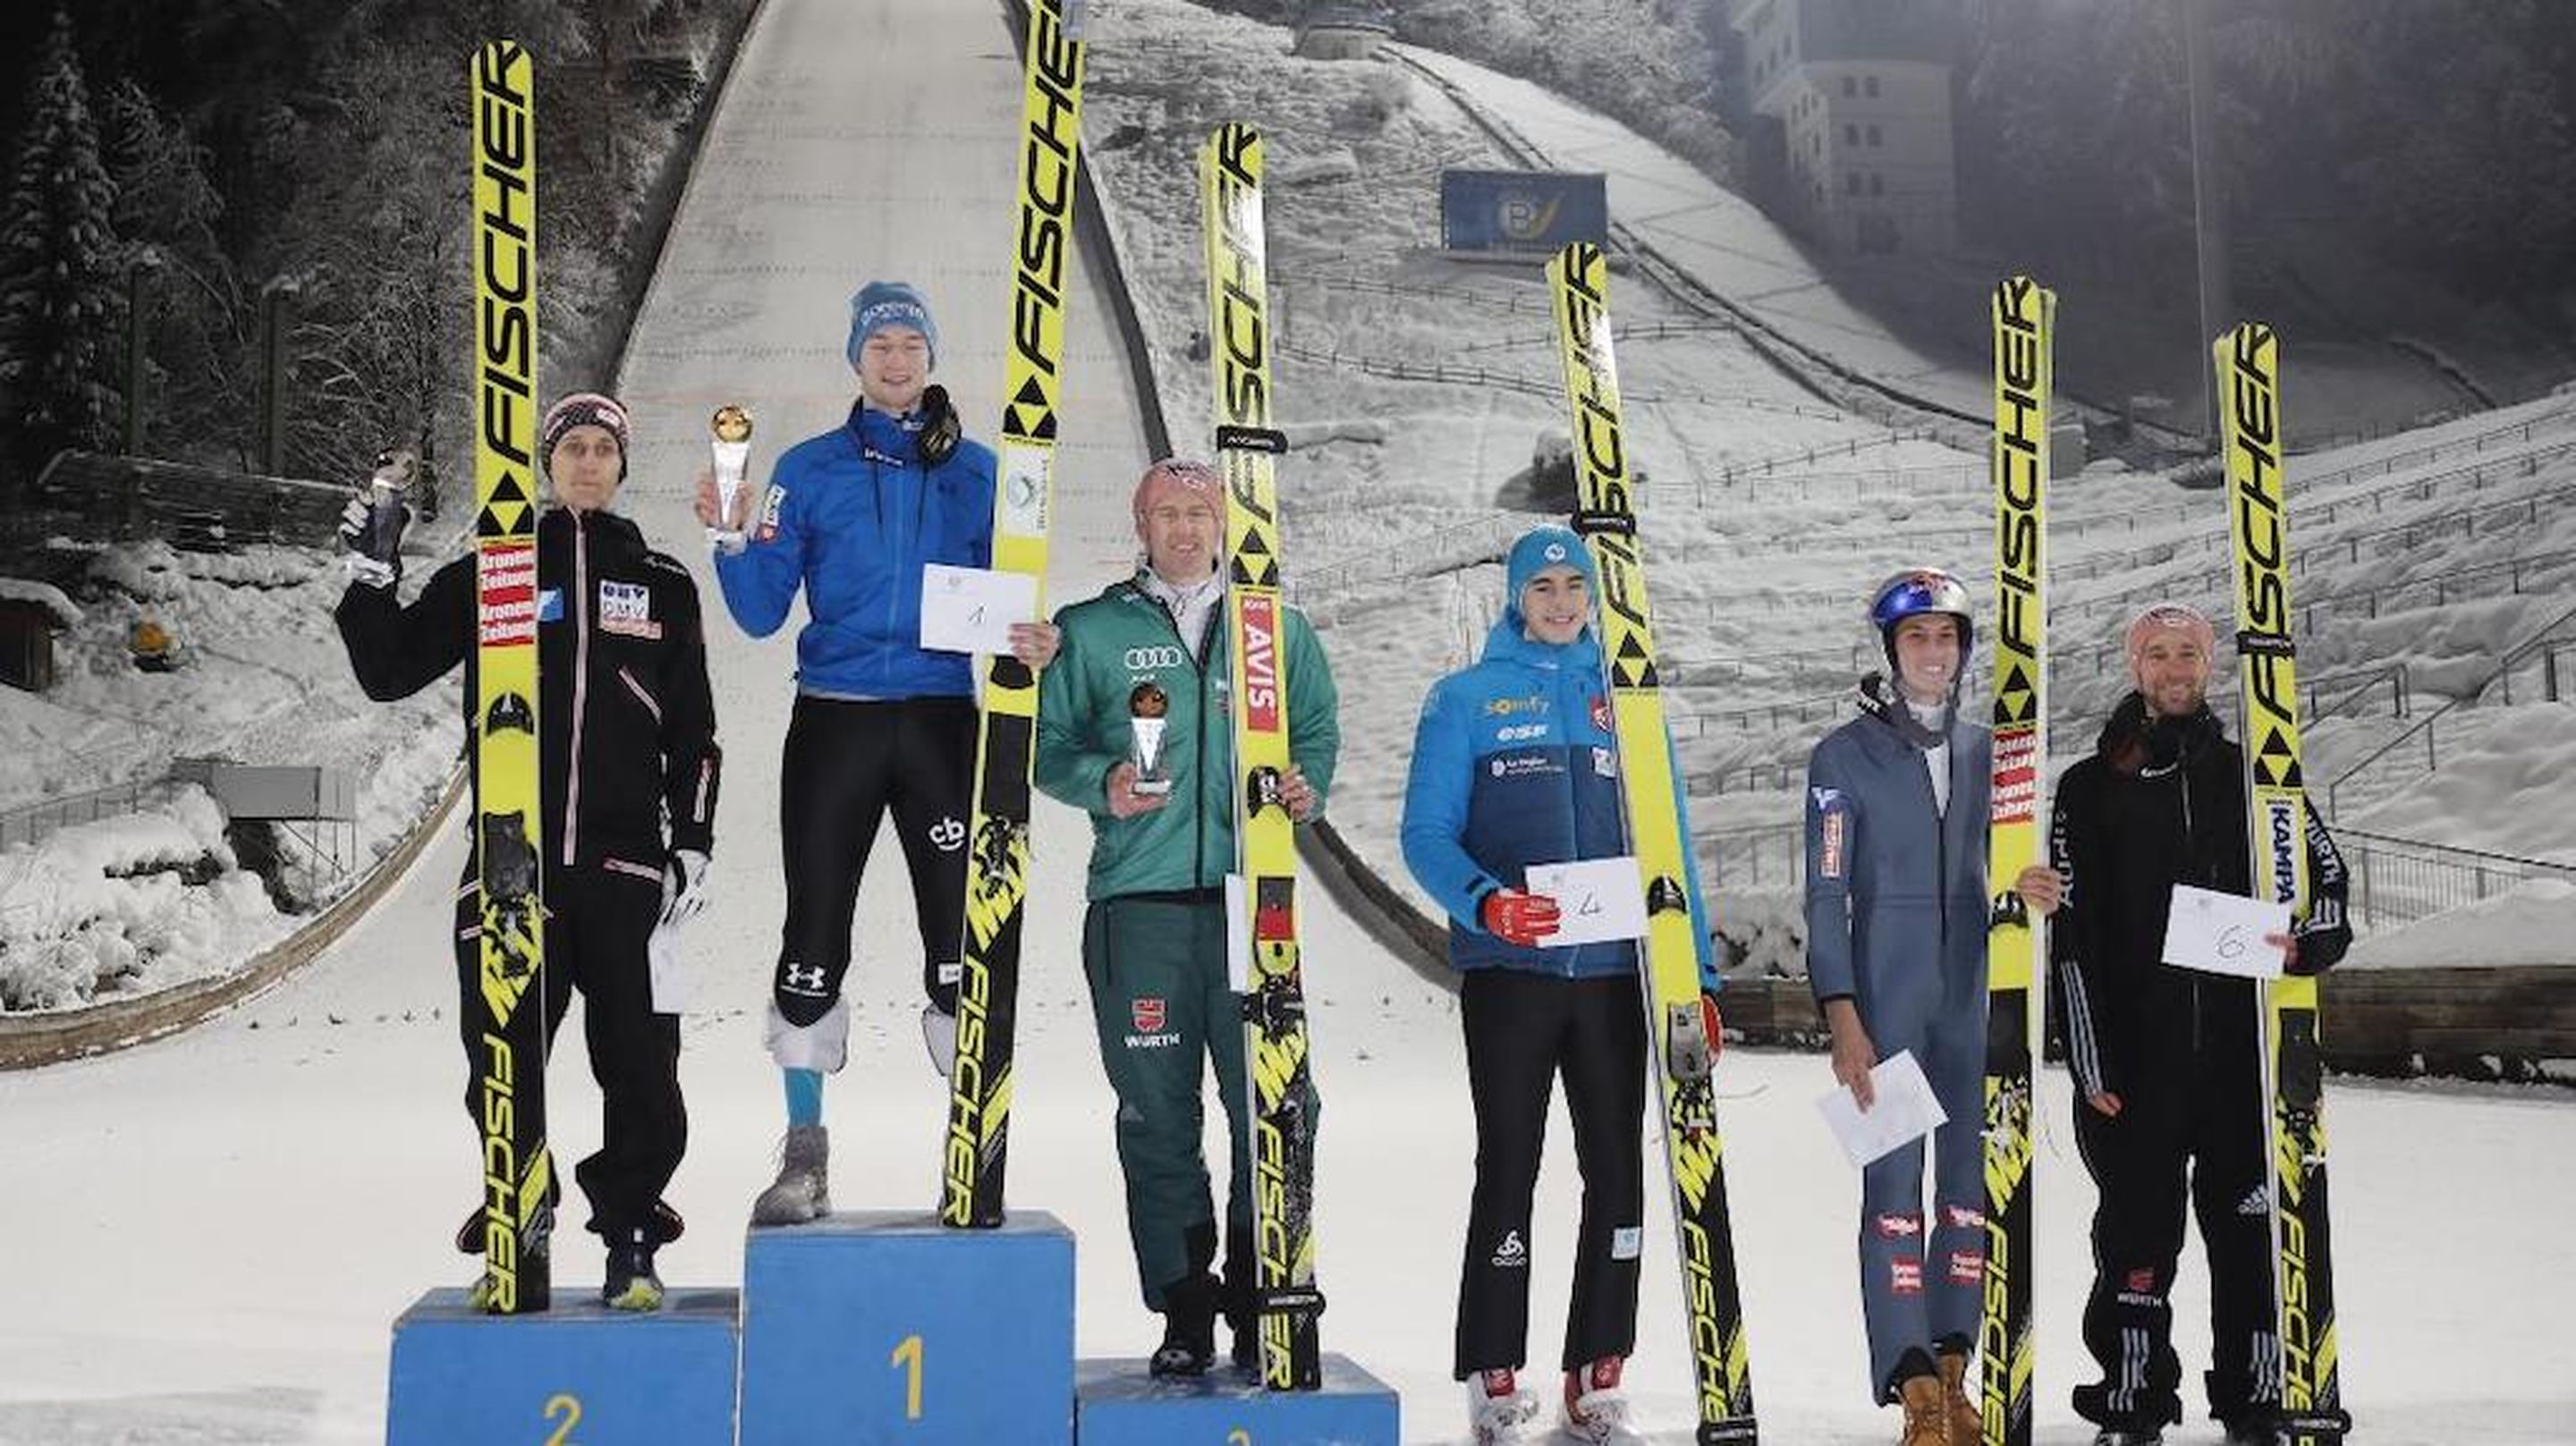 Top 6 2nd Continental Cup competition in Bischofshofen